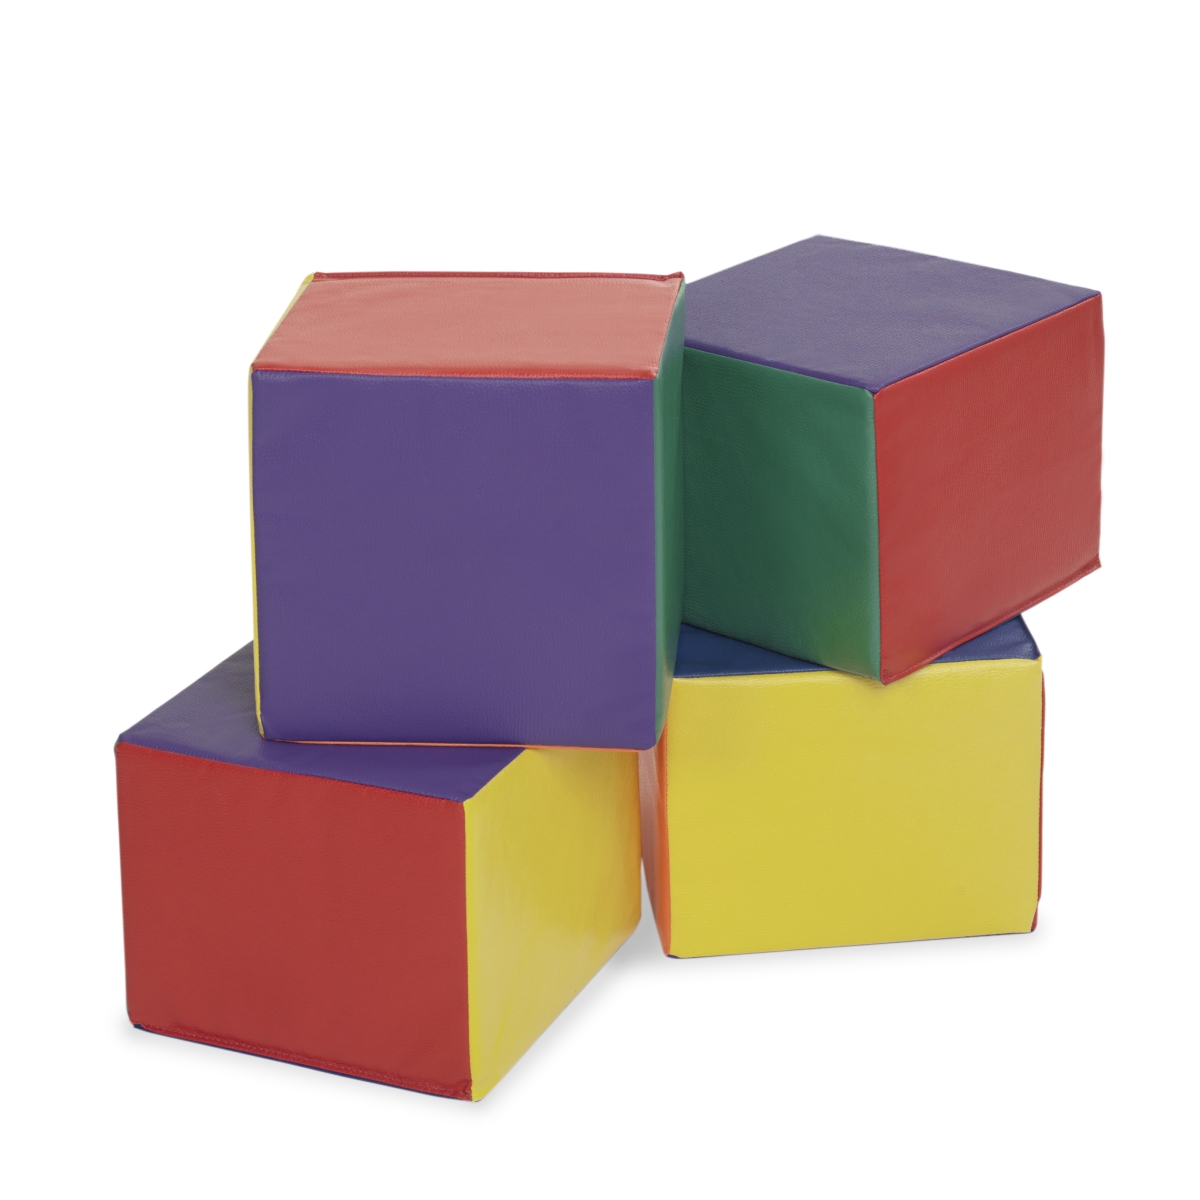 10435-as Child Carry Me Cube, Assorted Color - 4 Piece